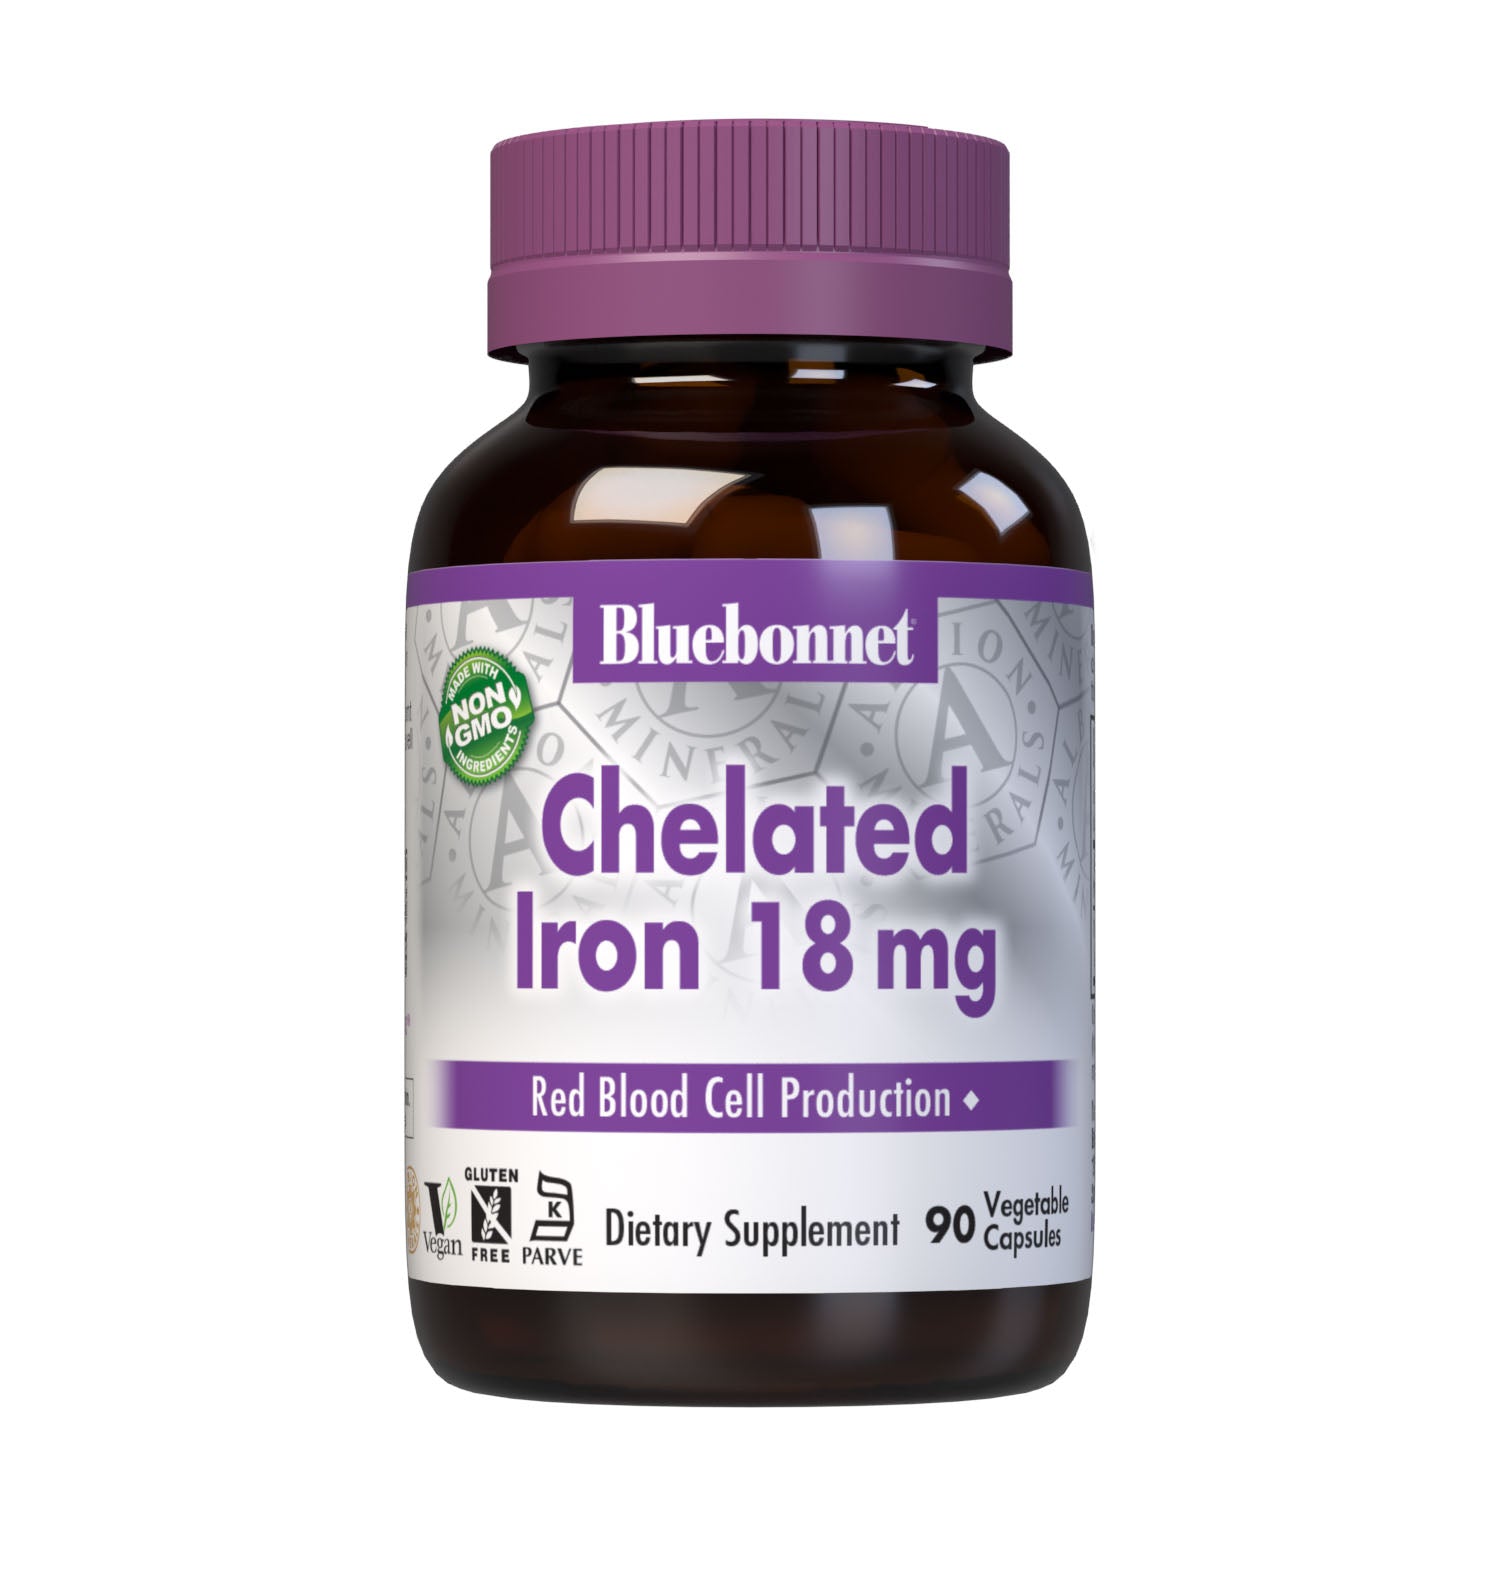 Bluebonnet's Chelated Iron 18 mg 90 Vegetable Capsules are formulated with a gentle, non-constipating form of iron known as Ferrochel, a patented, fully reacted chelated ferrous bisglycinate from Albion. Iron is an essential element that is necessary for healthy red blood cell production as well as transferring oxygen throughout the body. #size_90 count